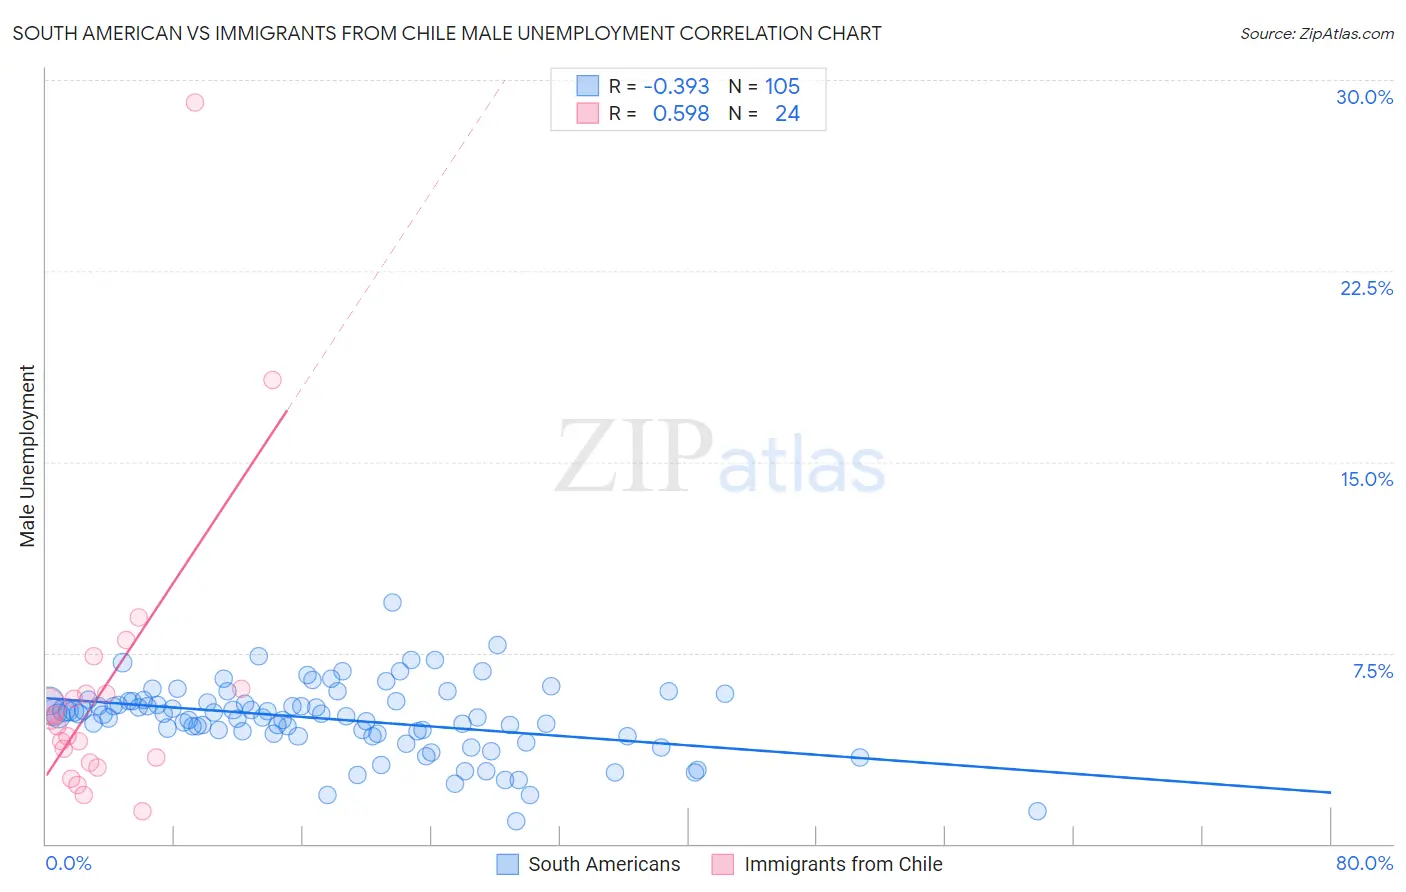 South American vs Immigrants from Chile Male Unemployment